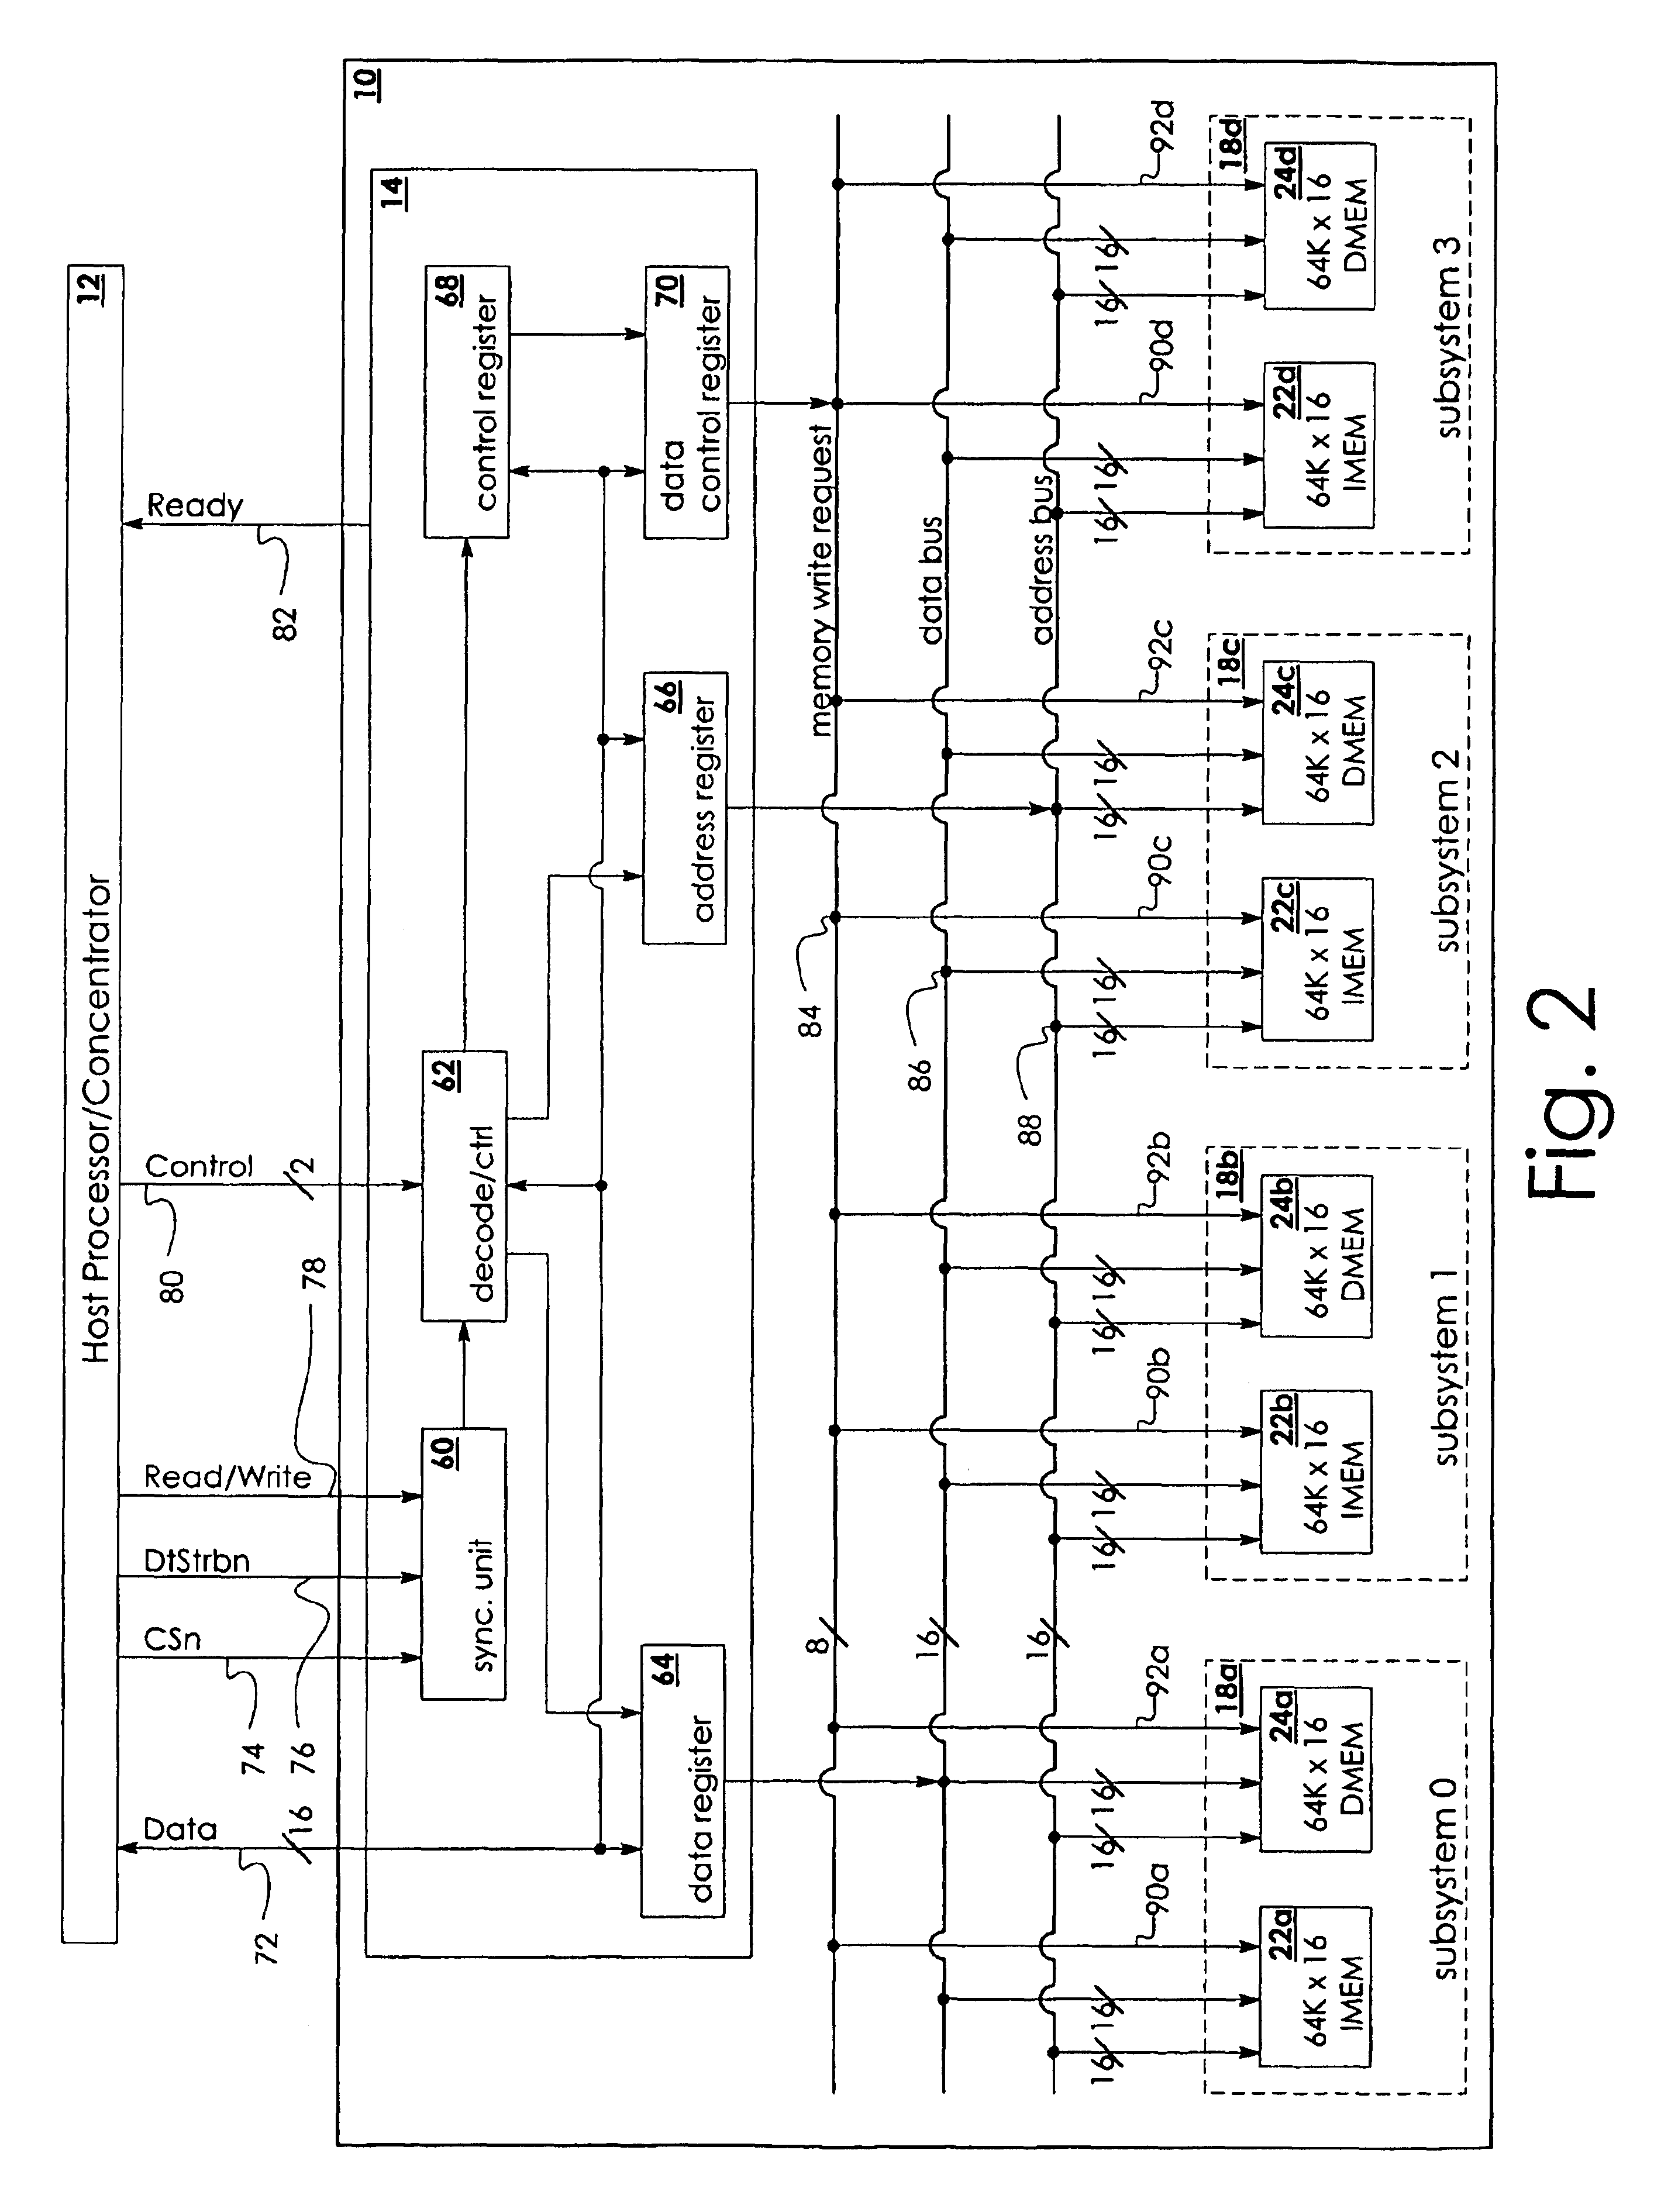 Method and system for a host processor to broadcast data to instruction or data memories of several processors in a multi-processor integrated circuit